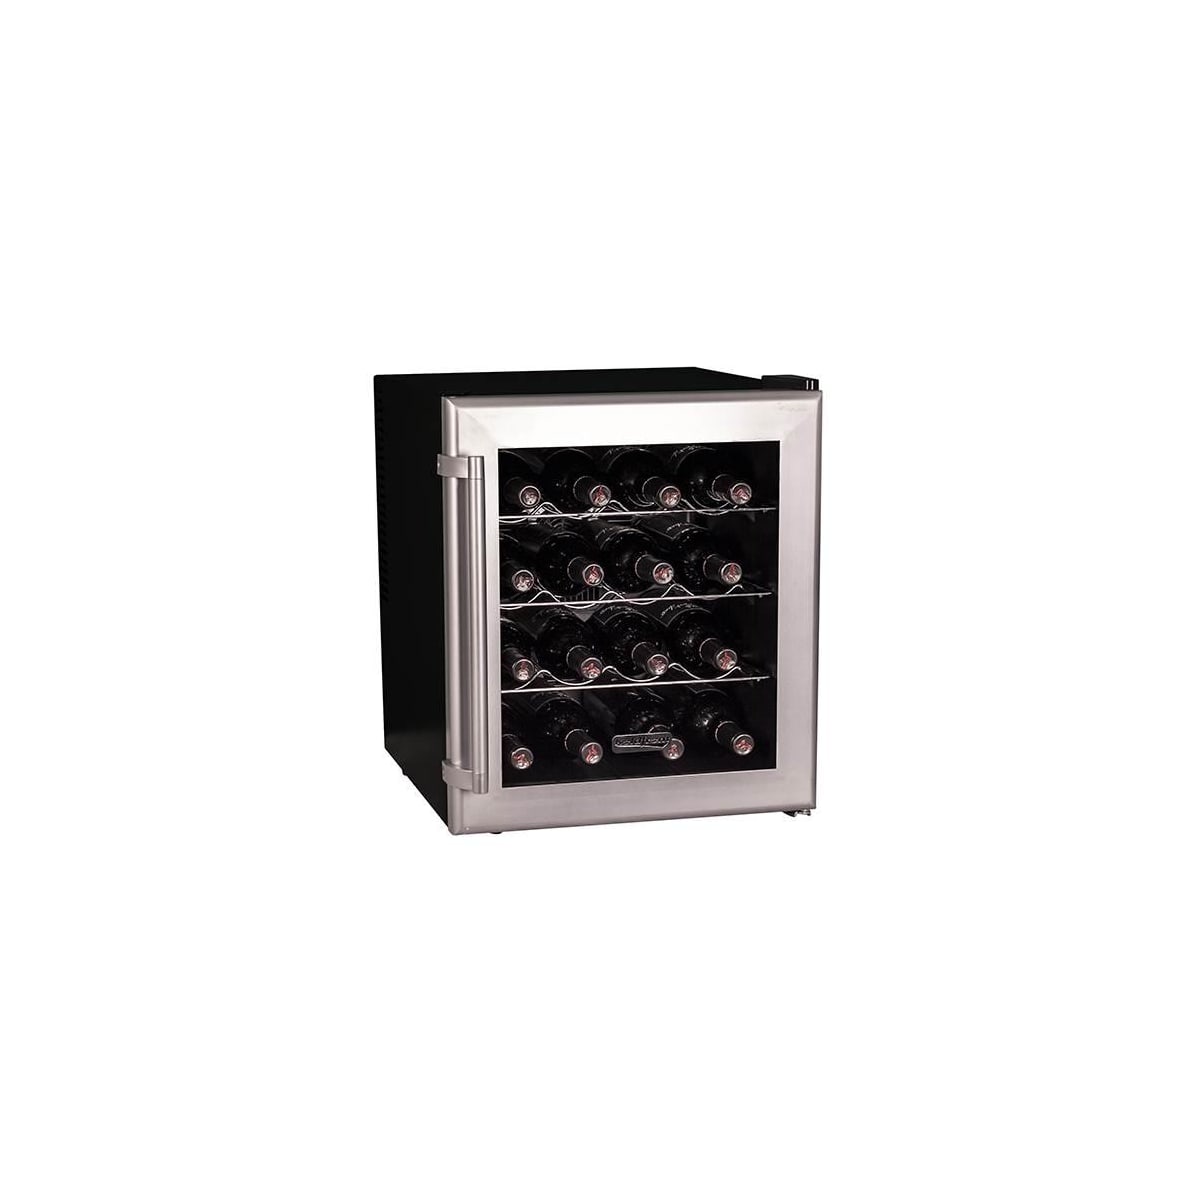 Koldfront TWR160S 16 Bottle Thermoelectric Freestanding Wine Cooler 